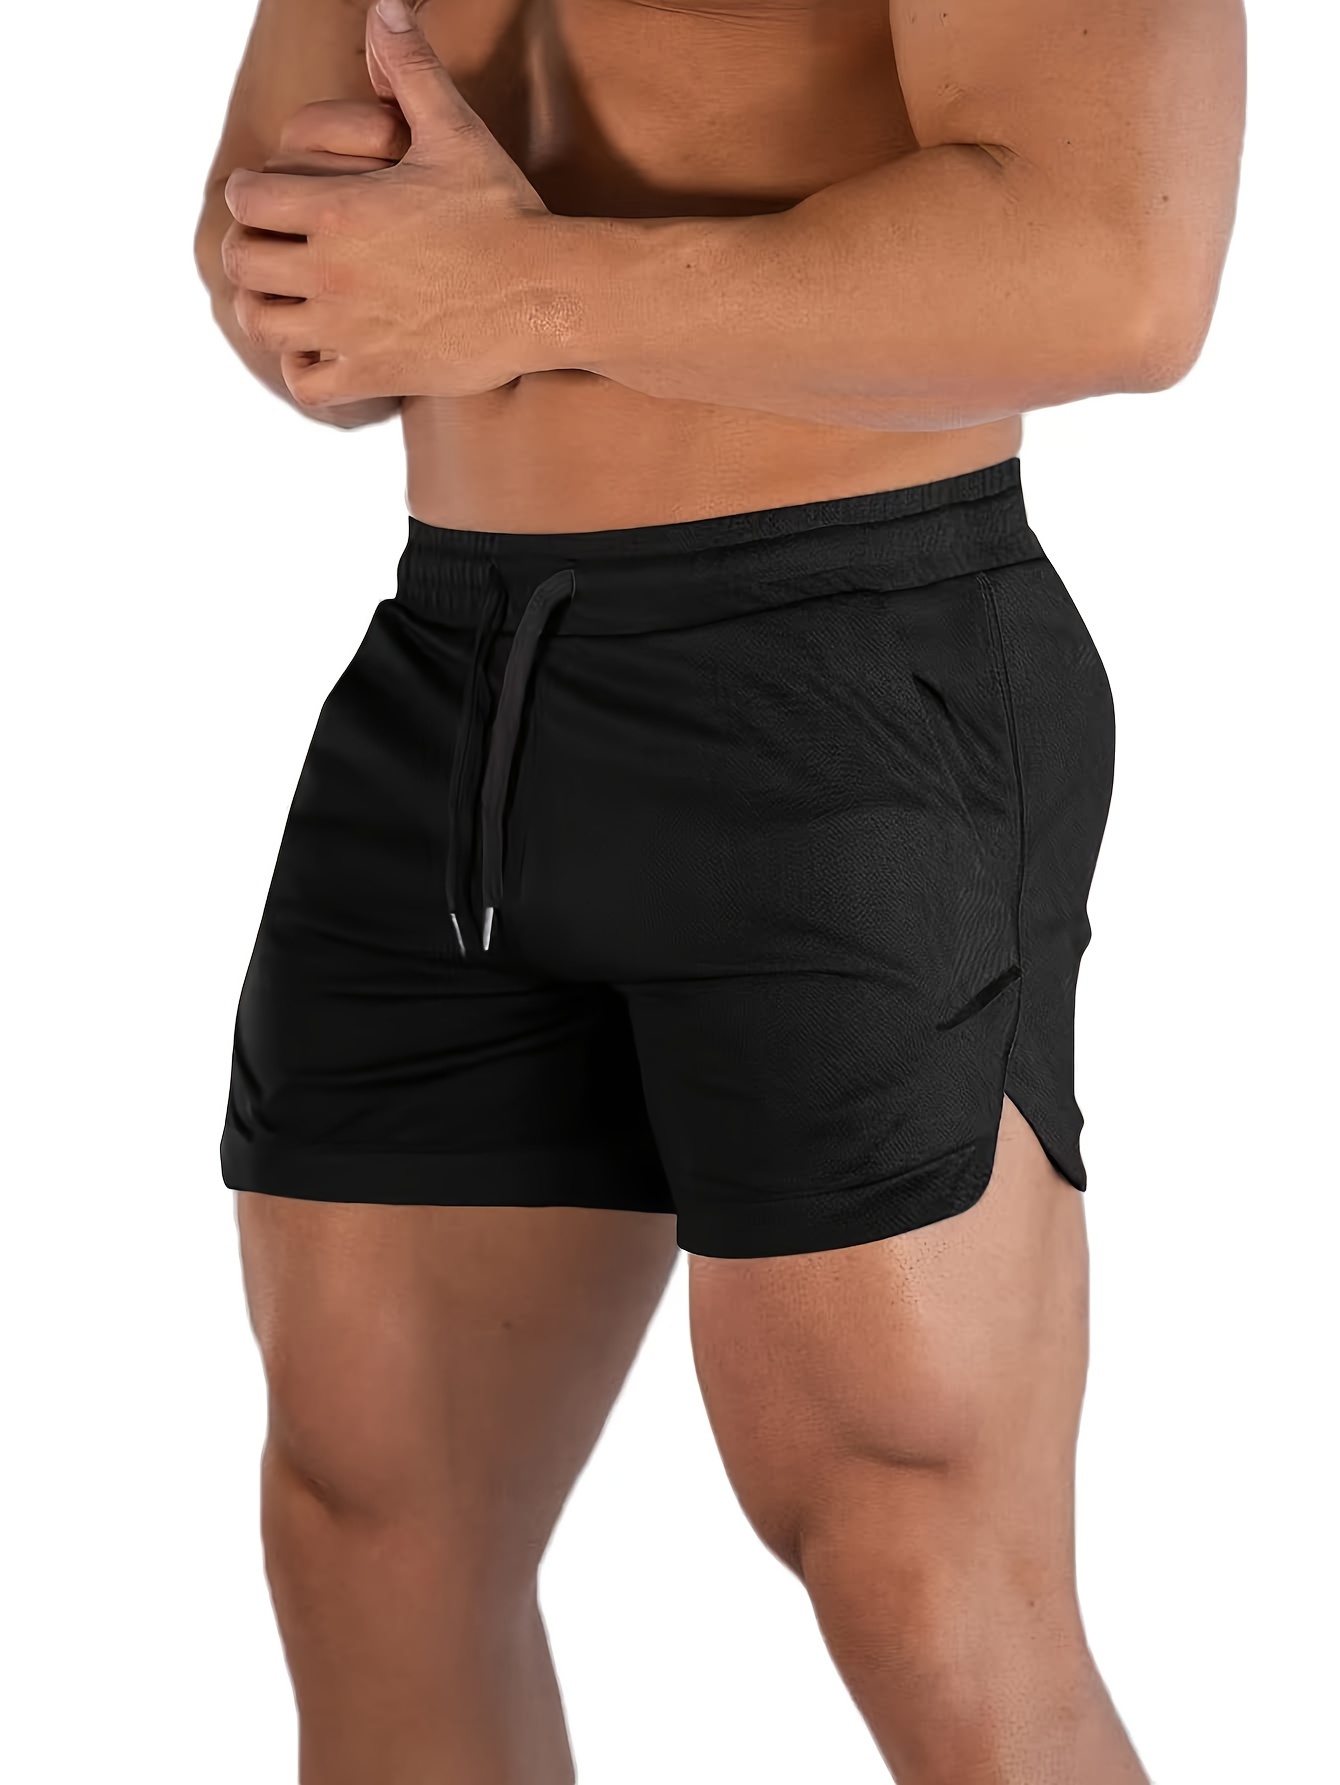 Men's Casual Running Shorts, 2 In 1 Sports Shorts With Phone Pocket  Sweatpants Best Sellers